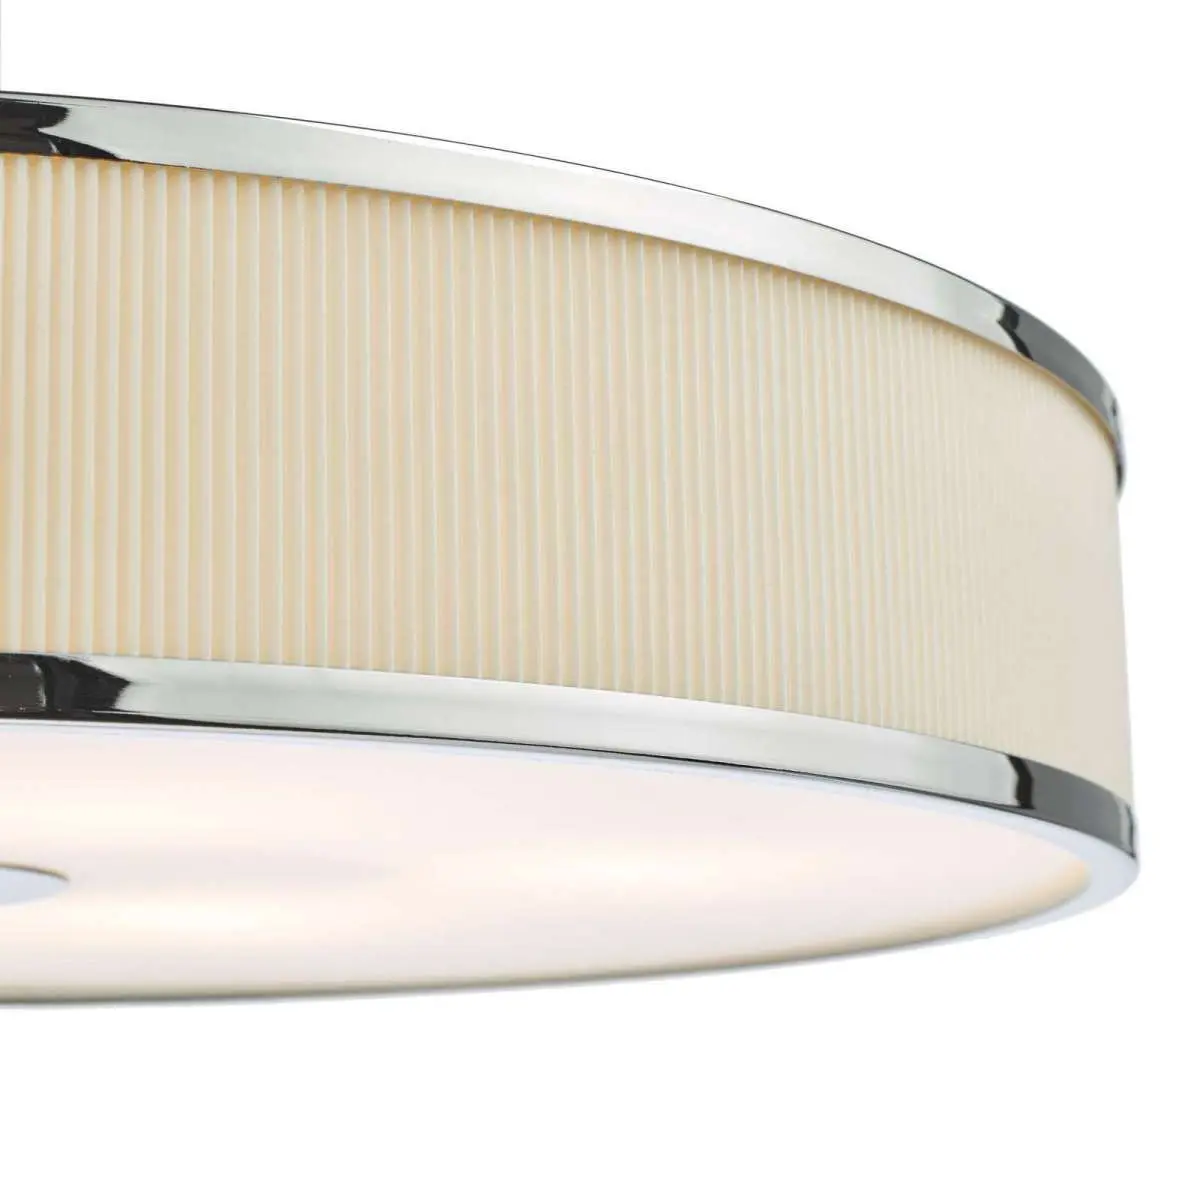 Alvaro 6 Light Pendant in Polished Chrome with Ivory Detail